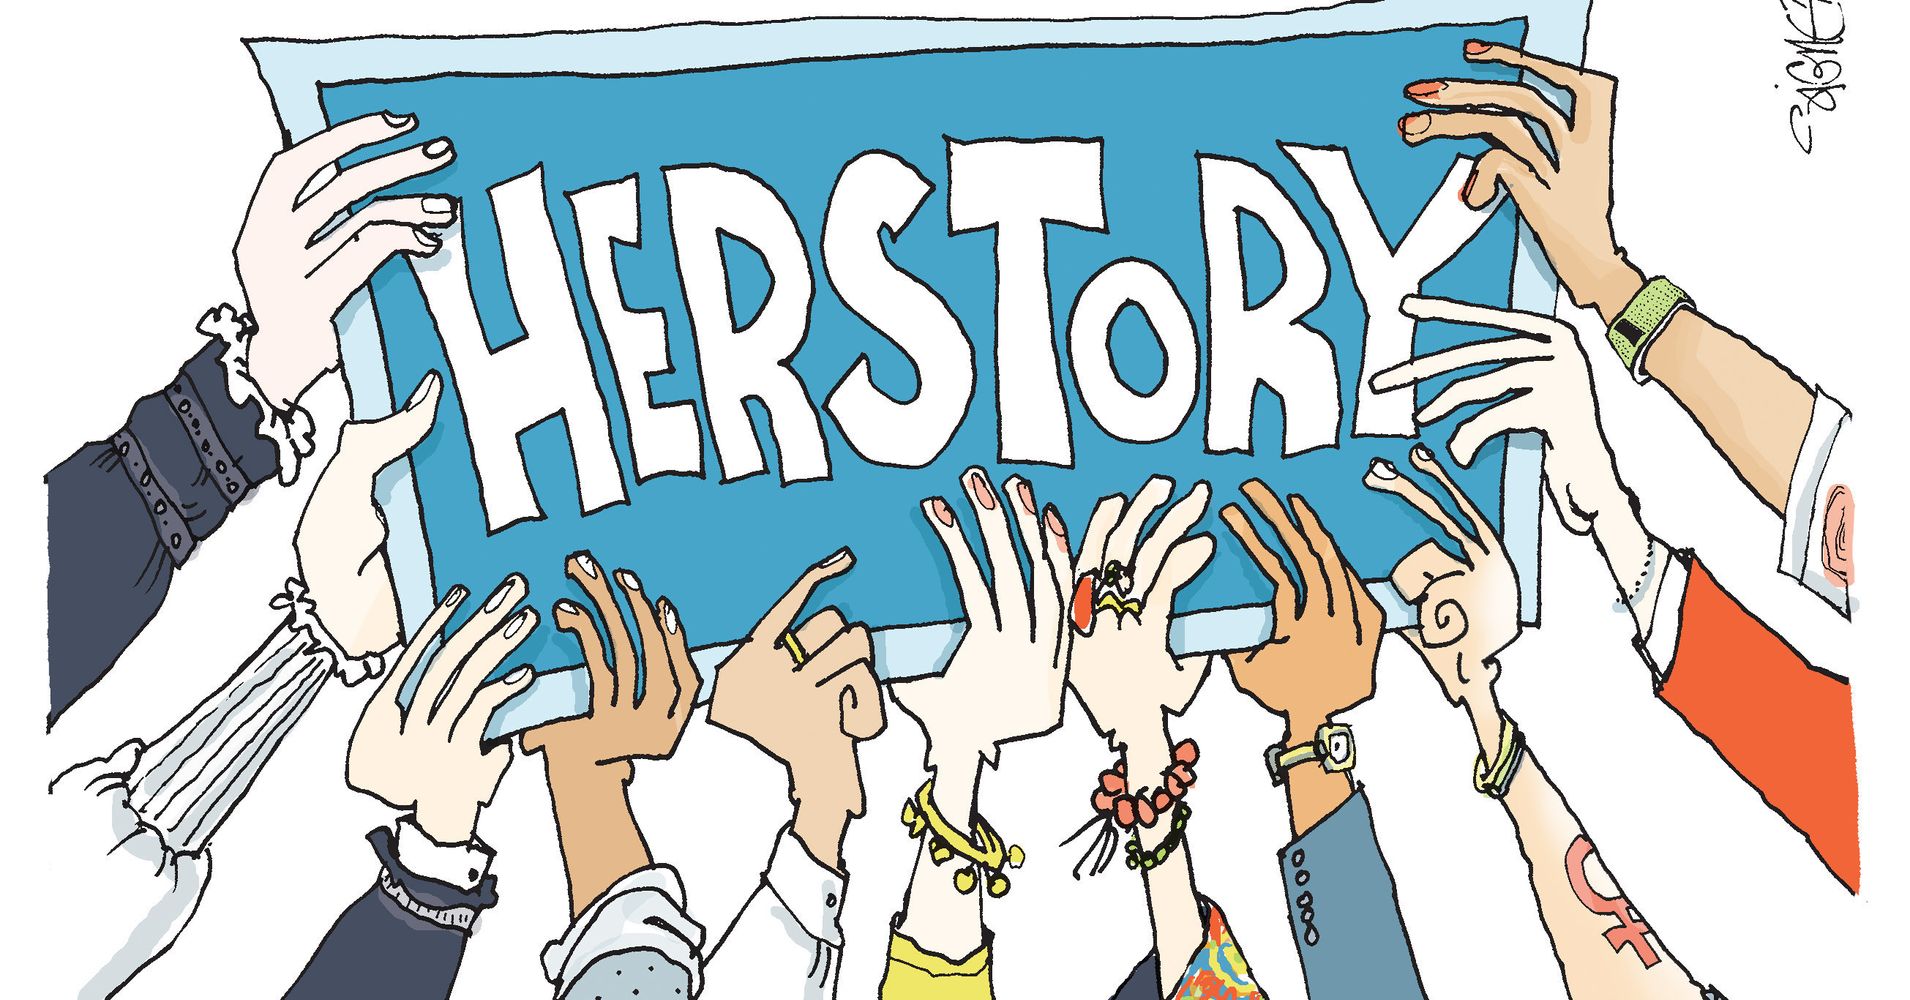 Three Female Cartoonists Open Up About Drawing Hillary Clinton | HuffPost1910 x 1000